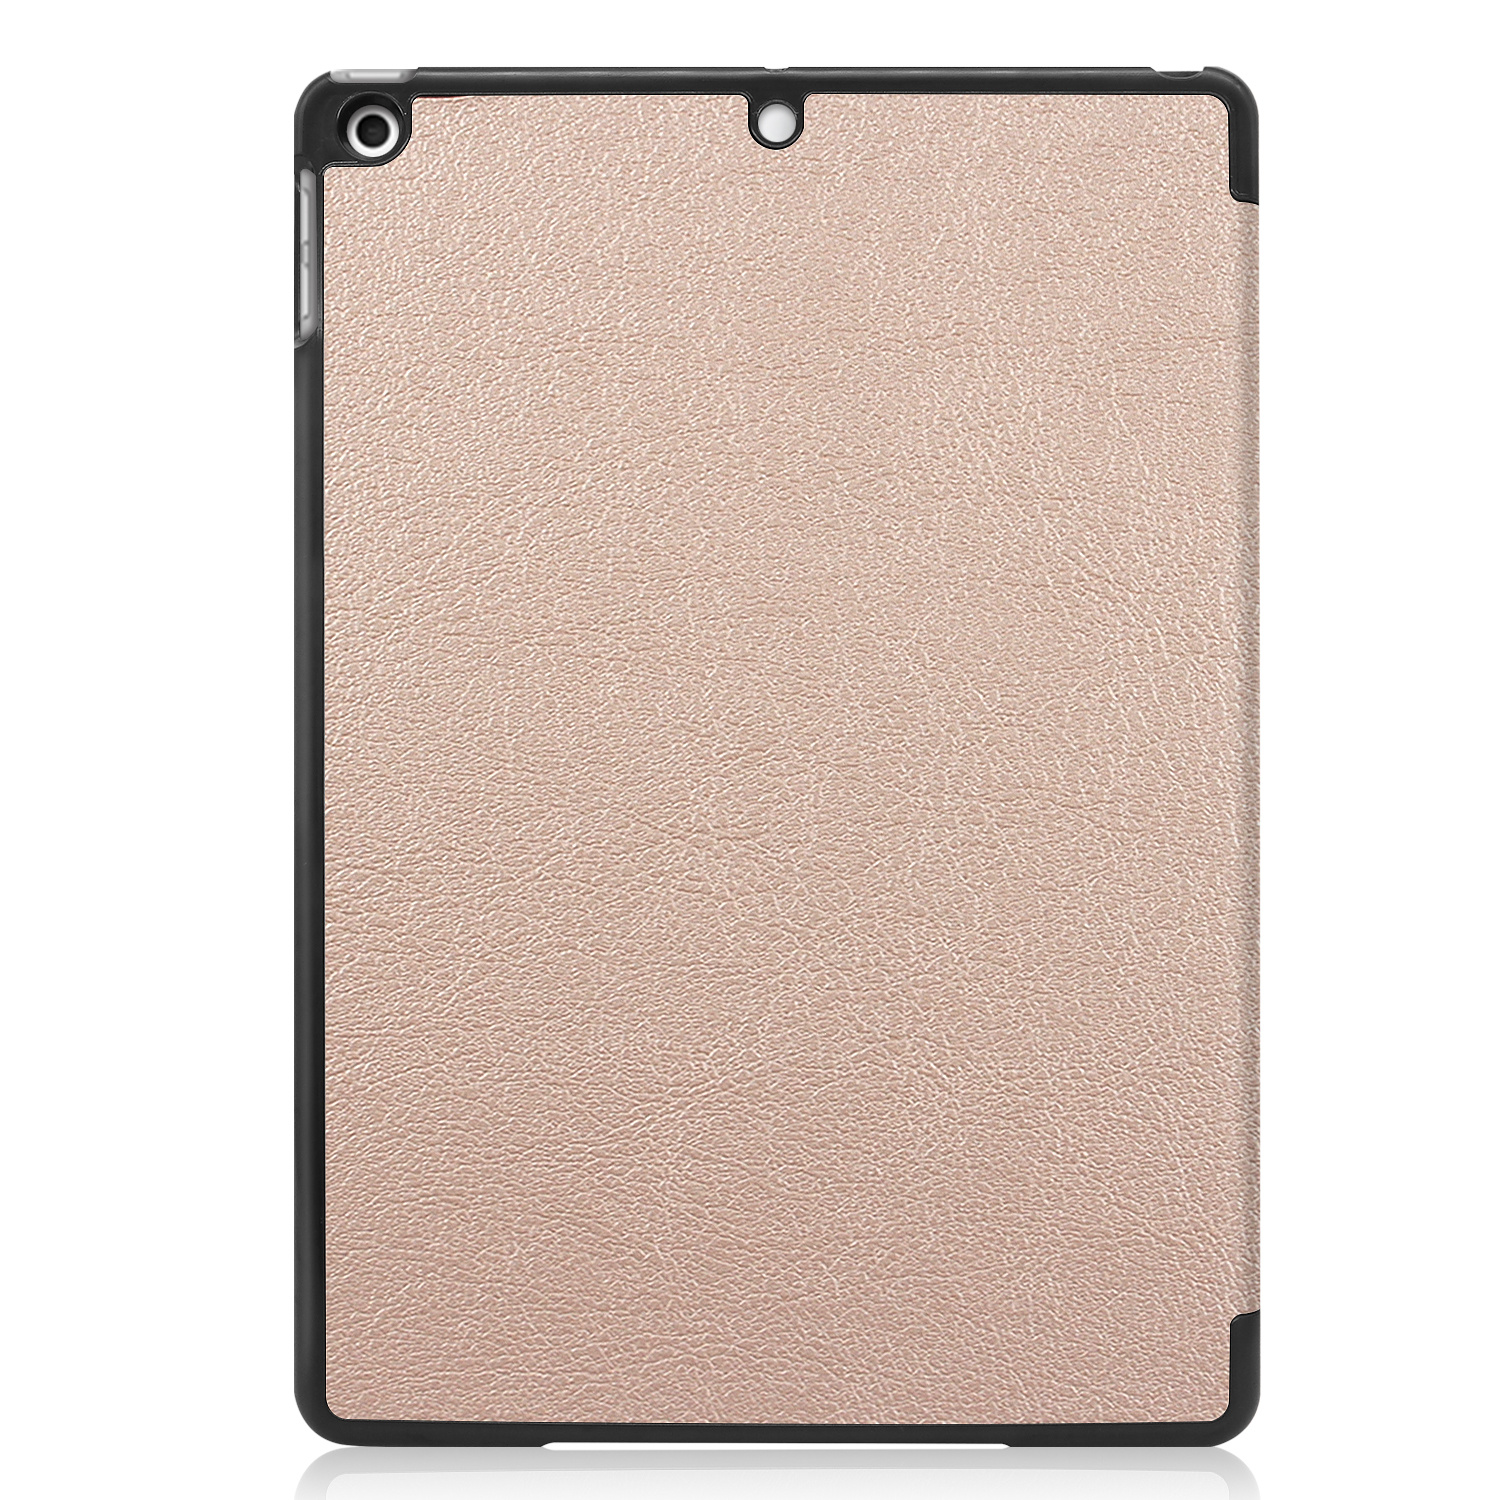 Nomfy iPad 10.2 2020 Hoesje Book Case Hoes - iPad 10.2 2020 Hoes Hardcover Case Hoesje - Goud